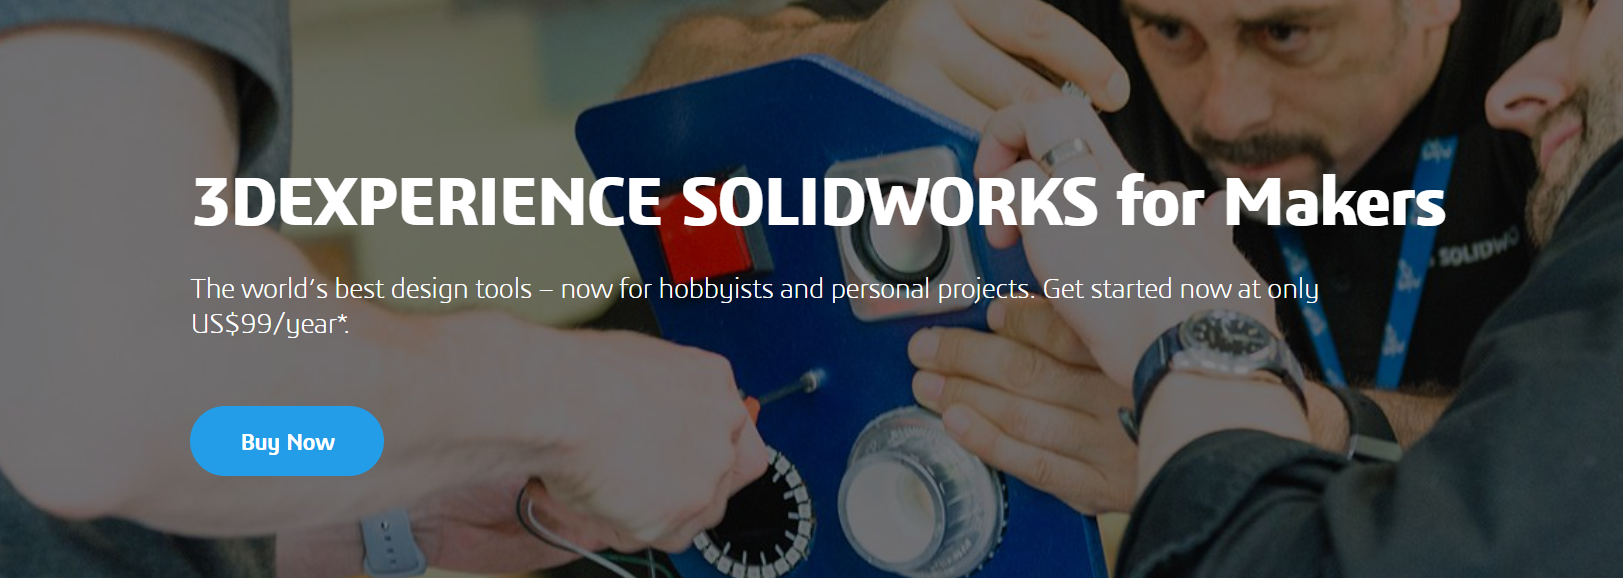 tool for 3dexperience solidworks user